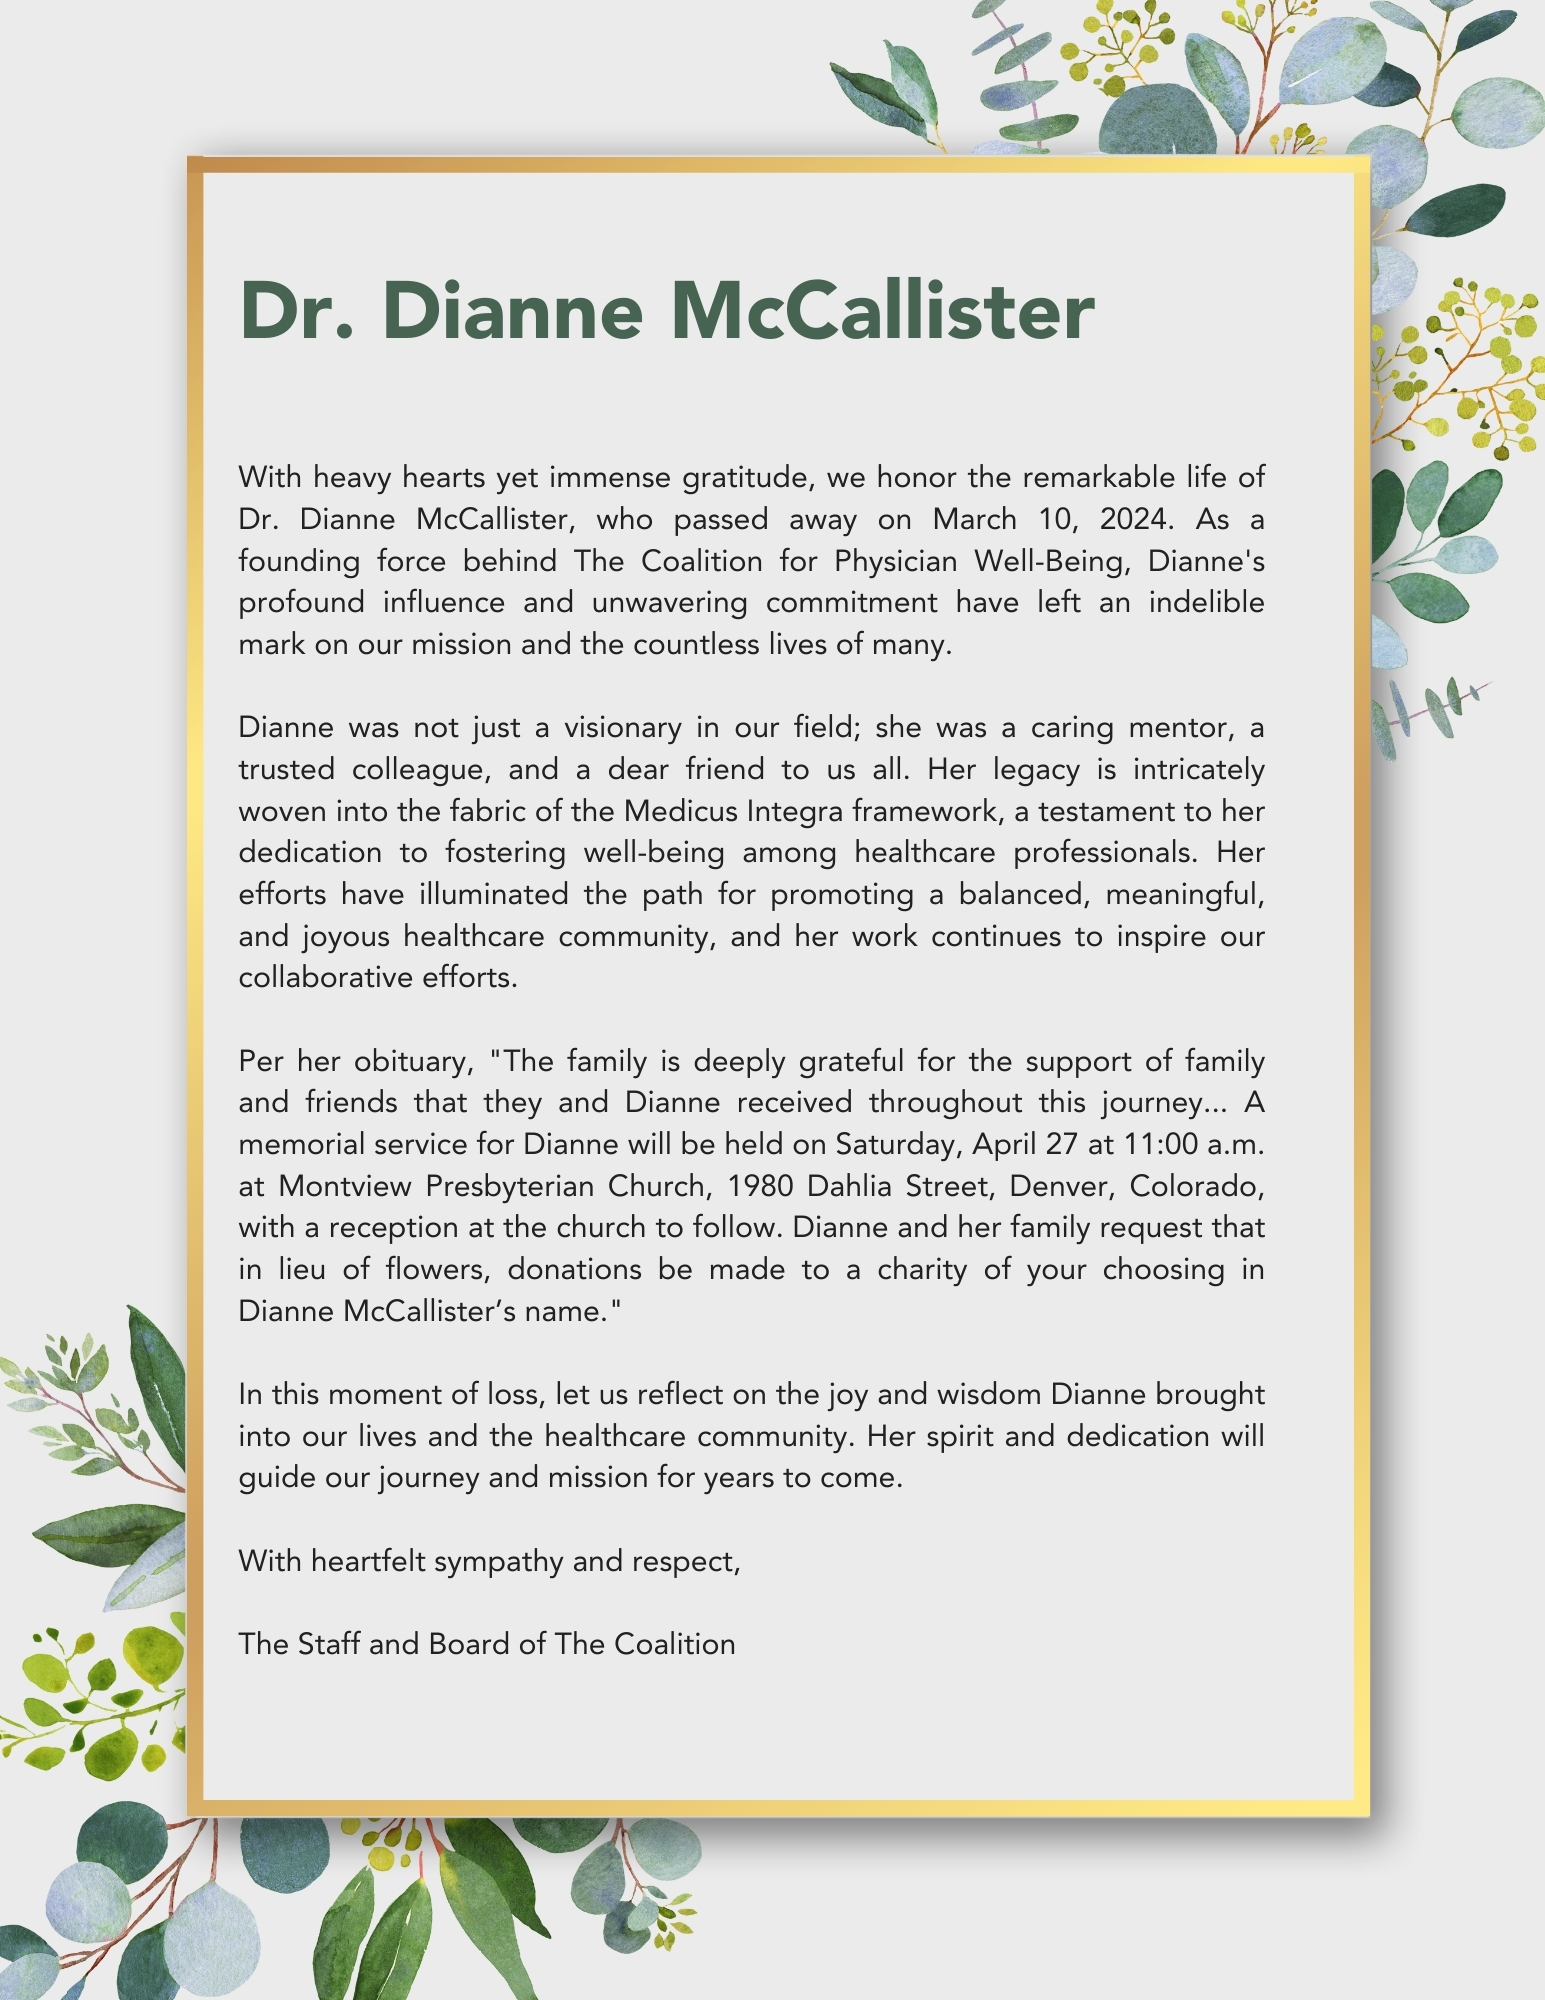 Dr. Dianne McCallister  With heavy hearts yet immense gratitude, we honor the remarkable life of Dr. Dianne McCallister, who passed away on March 10, 2024. As a founding force behind The Coalition for Physician Well-Being, Dianne's profound influence and unwavering commitment have left an indelible mark on our mission and the countless lives of many.  Dianne was not just a visionary in our field; she was a caring mentor, a trusted colleague, and a dear friend to us all. Her legacy is intricately woven into the fabric of the Medicus Integra framework, a testament to her dedication to fostering well-being among healthcare professionals. Her efforts have illuminated the path for promoting a balanced, meaningful, and joyous healthcare community, and her work continues to inspire our collaborative efforts.  Per her obituary, "The family is deeply grateful for the support of family and friends that they and Dianne received throughout this journey... A memorial service for Dianne will be held on Saturday, April 27 at 11:00 a.m. at Montview Presbyterian Church, 1980 Dahlia Street, Denver, Colorado, with a reception at the church to follow. Dianne and her family request that in lieu of flowers, donations be made to a charity of your choosing in Dianne McCallister’s name."  In this moment of loss, let us reflect on the joy and wisdom Dianne brought into our lives and the healthcare community. Her spirit and dedication will guide our journey and mission for years to come.  With heartfelt sympathy and respect,  The Staff and Board of The Coalition